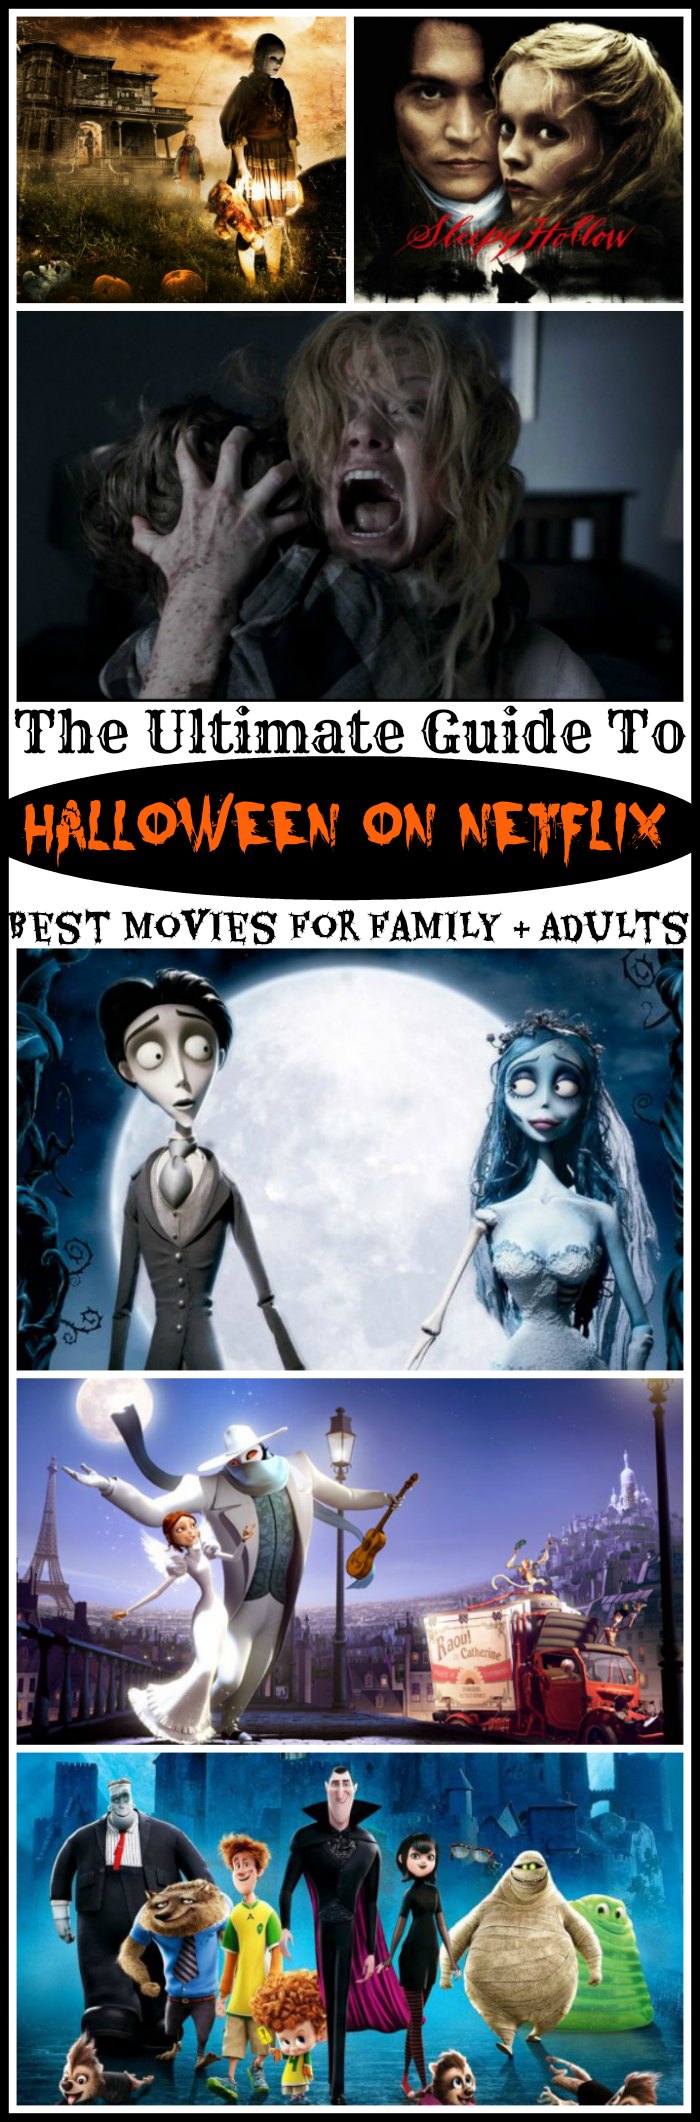 The Ultimate Guide To Halloween On Netflix